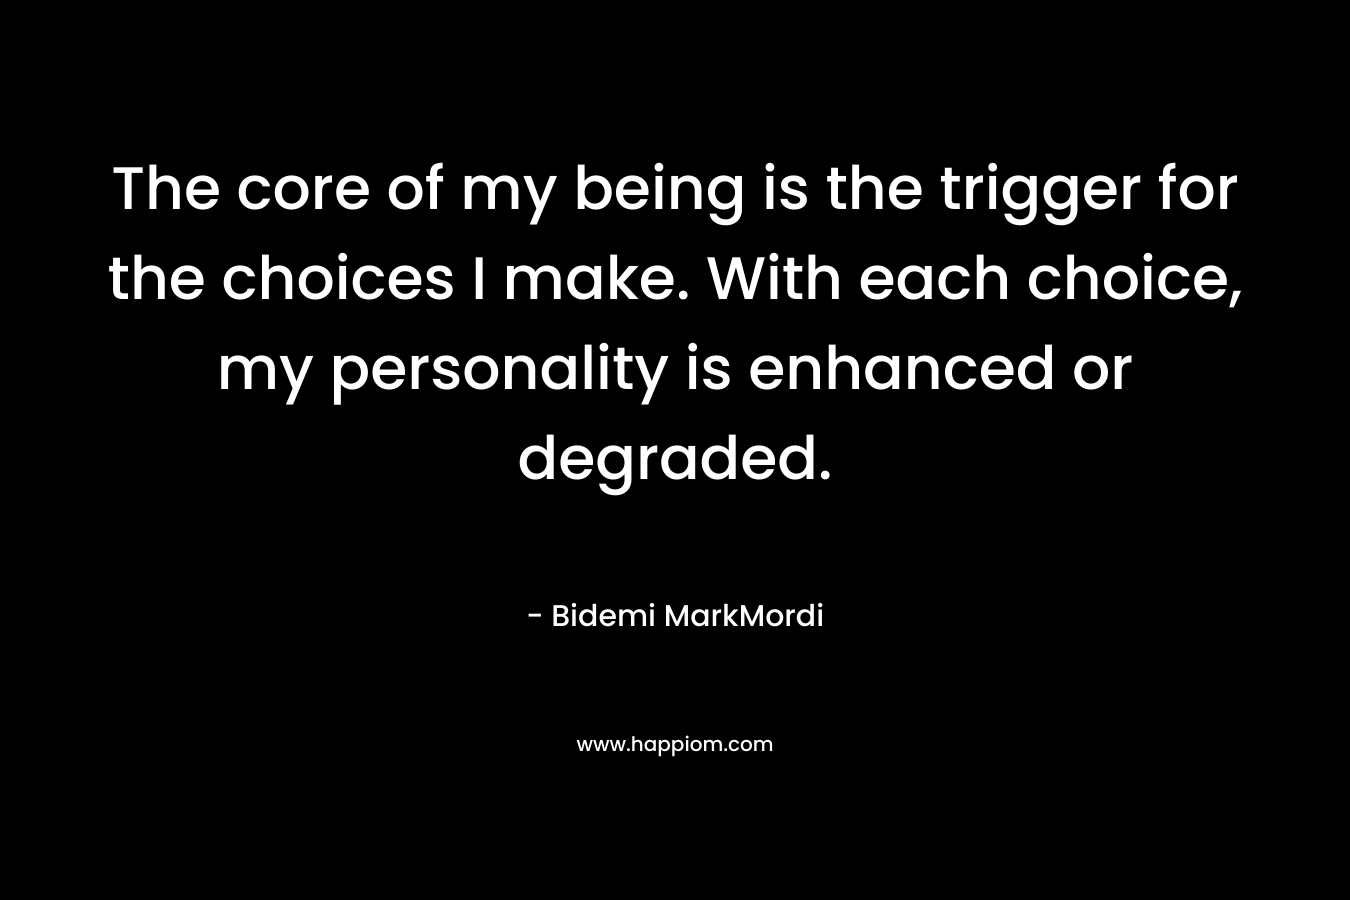 The core of my being is the trigger for the choices I make. With each choice, my personality is enhanced or degraded. – Bidemi MarkMordi